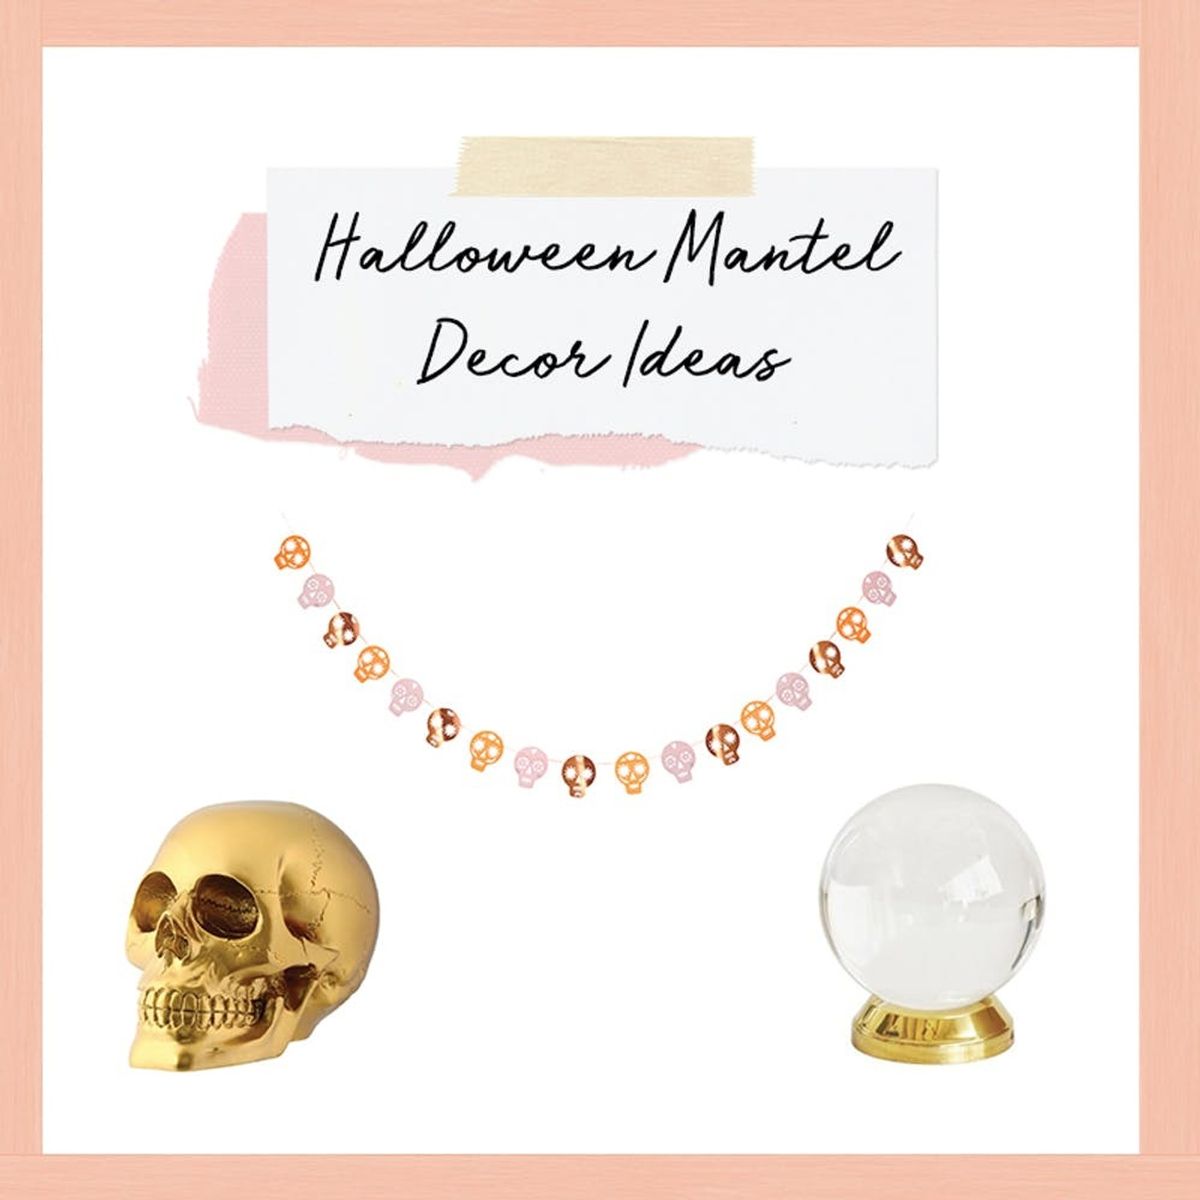 3 Spooky Ways to Style Your Mantel for Halloween